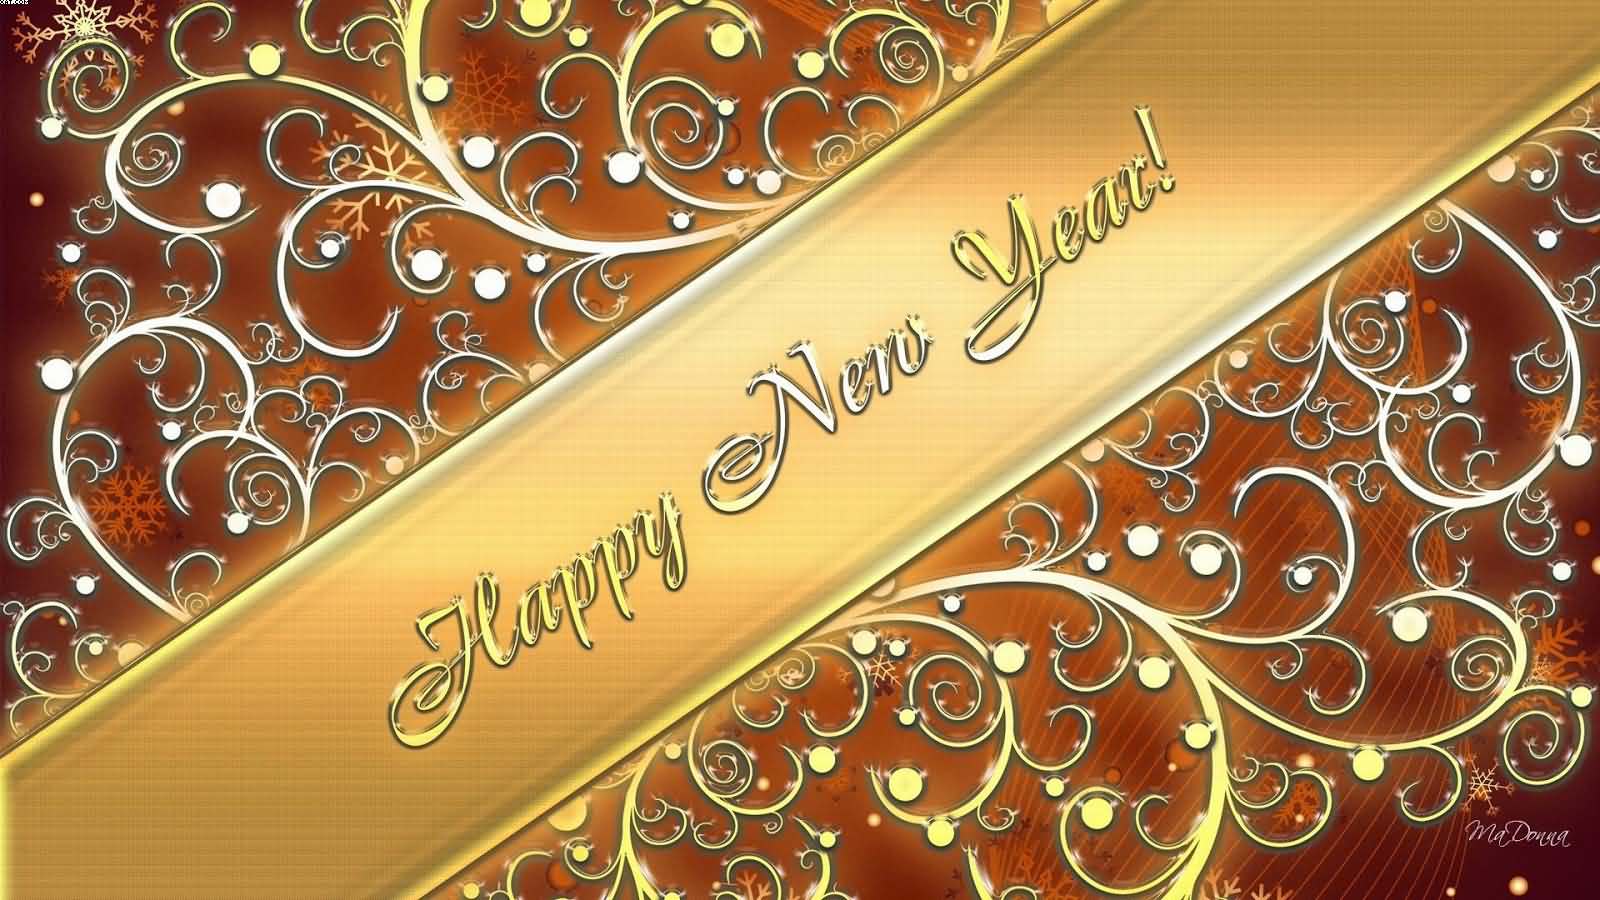 Happy New Year designed greeting card